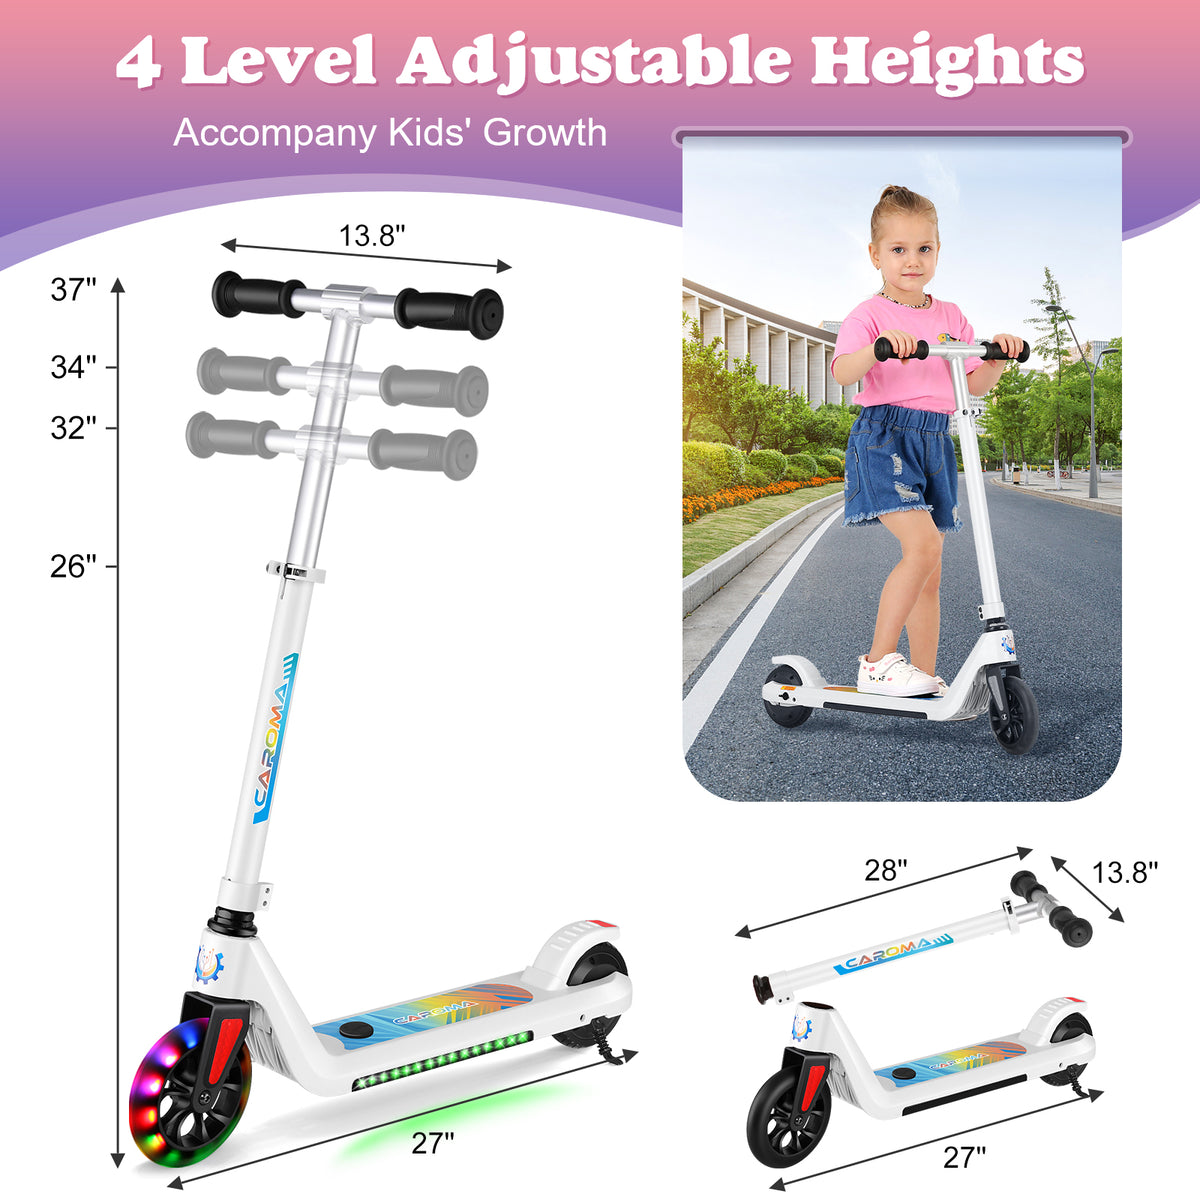 Caroma Electric Scooter , 120W Motor, 10 mph, 80 mins Ride Time, Adjustable Speed & Height, Colorful Lights, LED Display,Ideal Gifts for Kids Ages 6-14